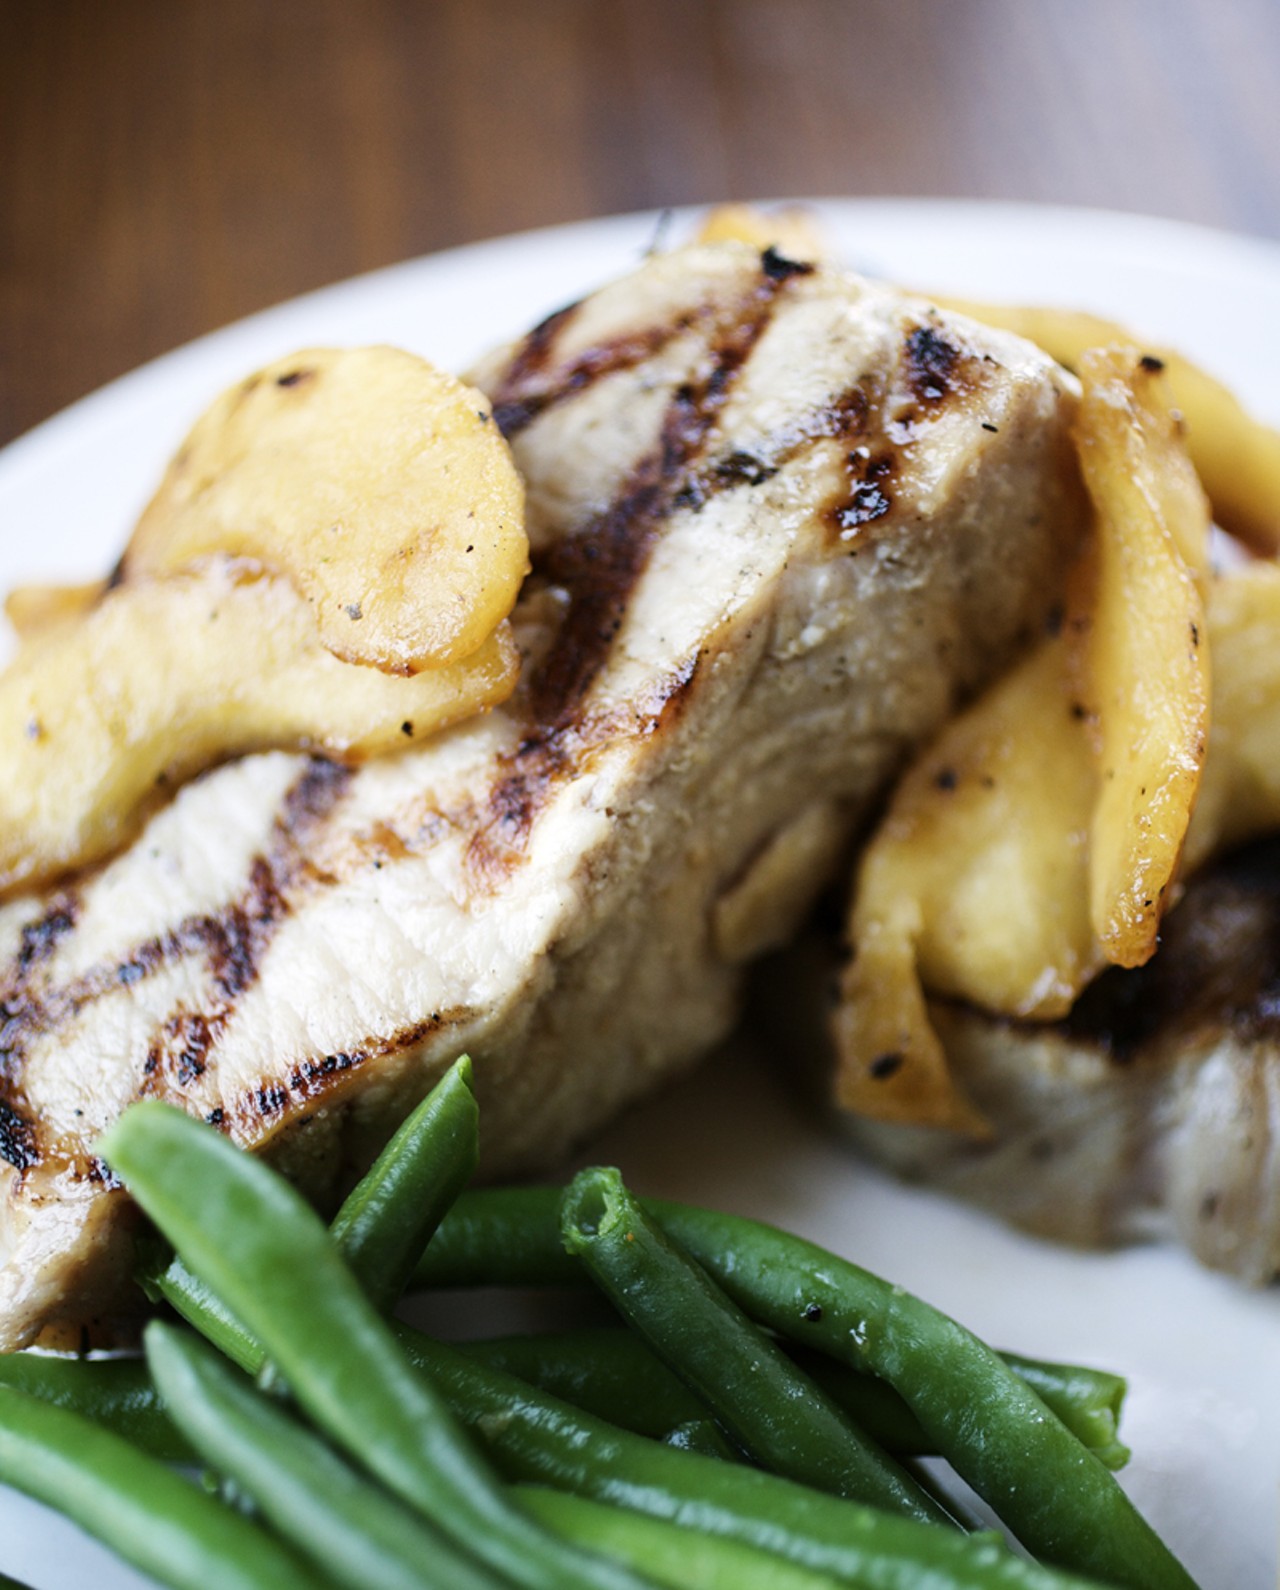 The Bistro Pork Chops are two 6oz center cut boneless chops seasoned and grilled and finished with saut&eacute;ed Fuji Apples in a cinnamon amaretto glaze.